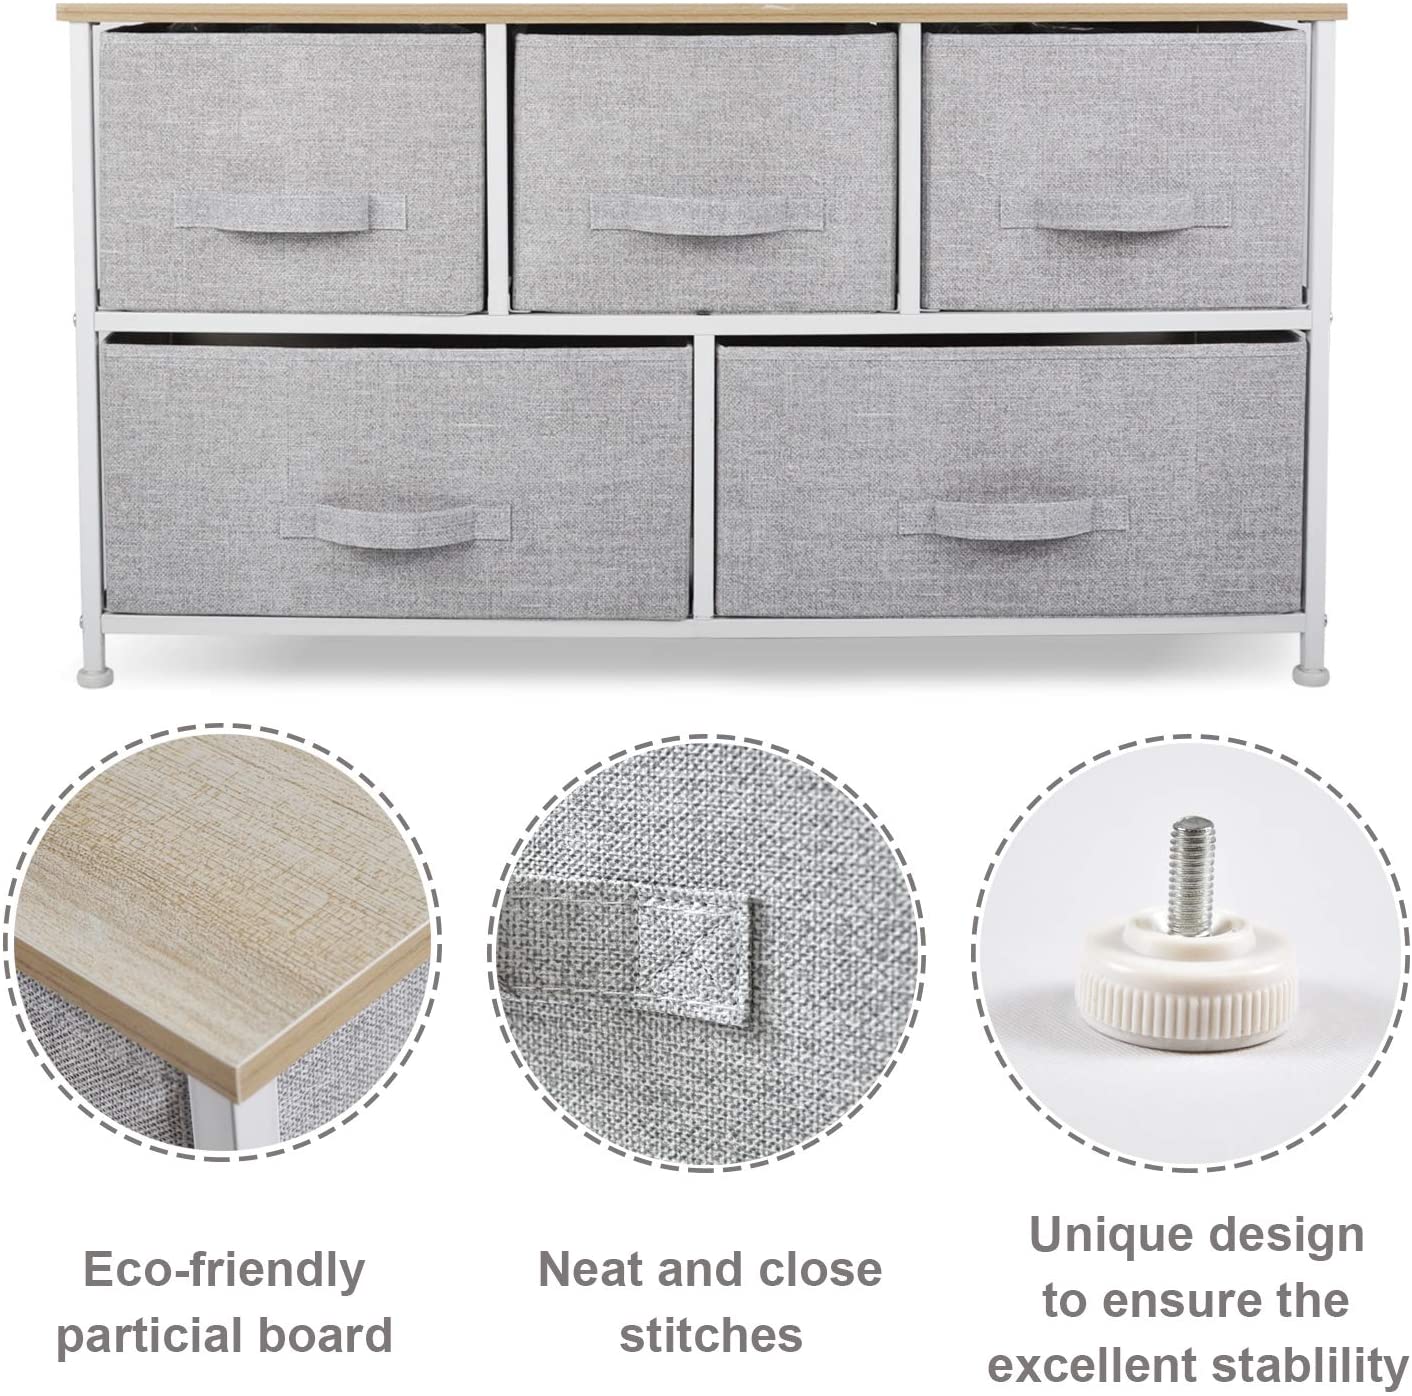 Wide Drawer Dresser Storage Organizer - CERBIOR 5-Drawer Closet Shelves, Sturdy Steel Frame Wood Top with Easy Pull Fabric Bins for Clothing, Blankets- Grey